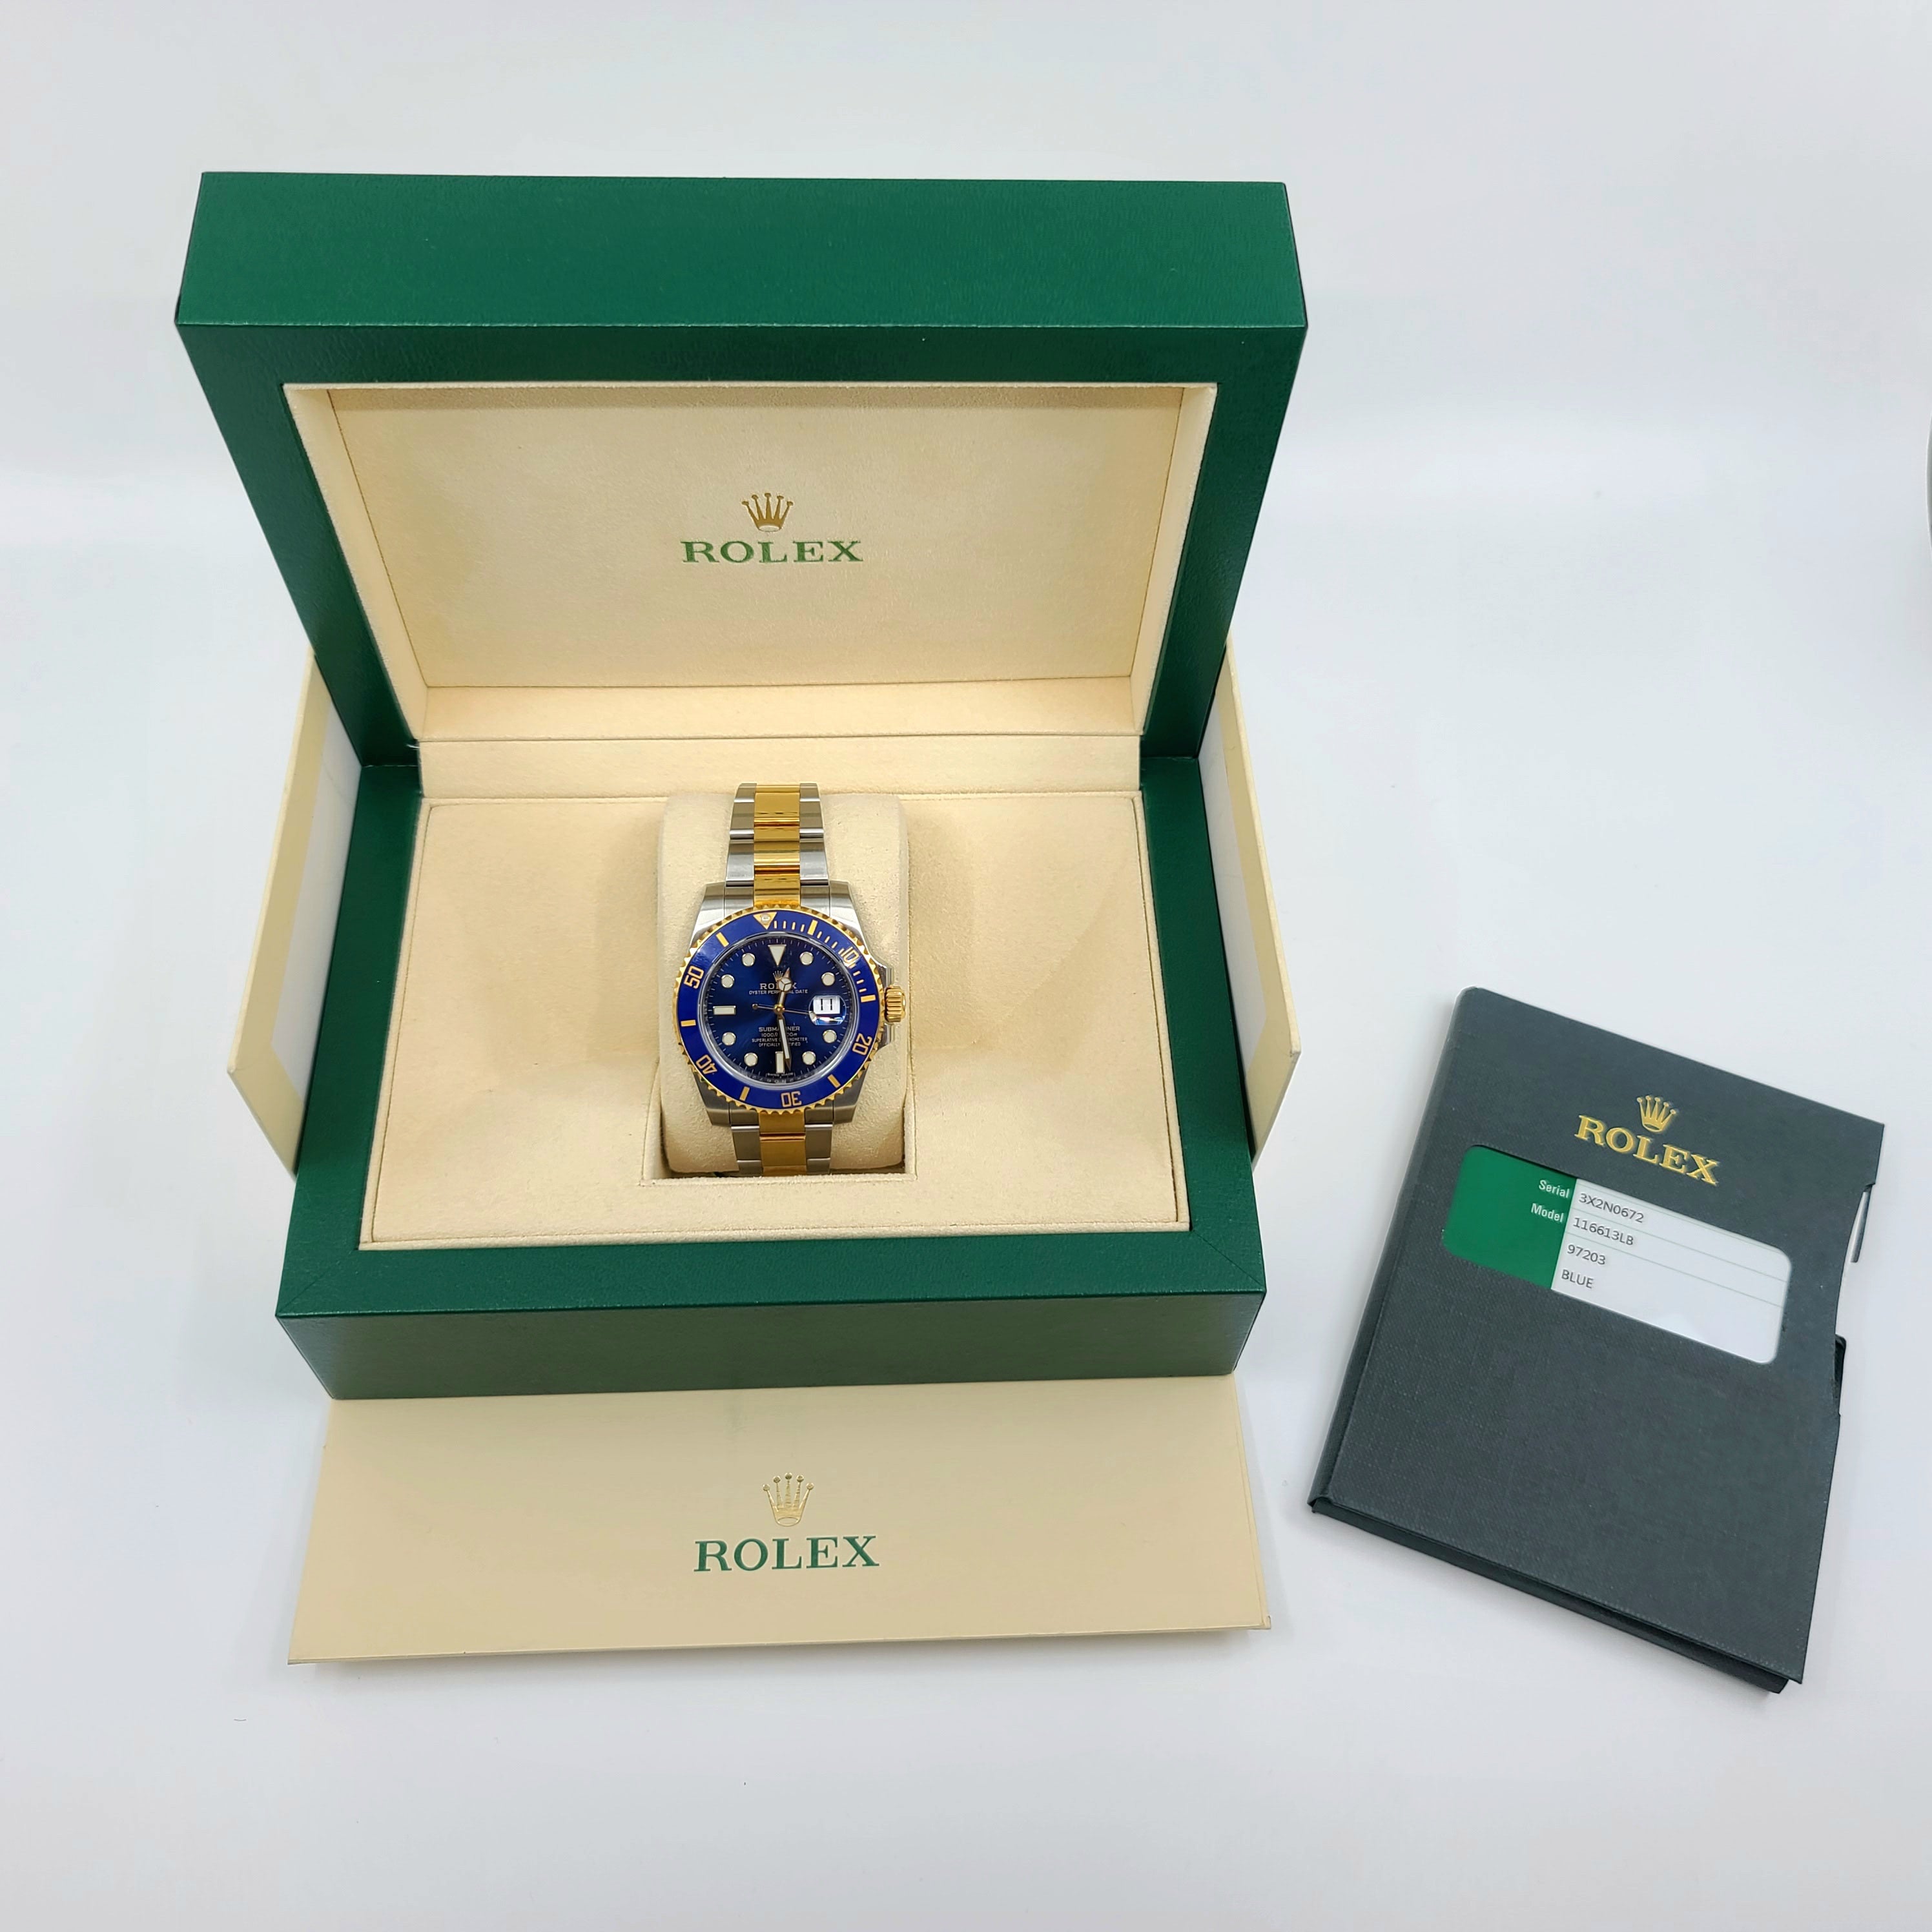 Rolex Oyster Perpetual Submariner Date 18K Yellow Gold & Stainless Steel Men's Watch, Preowned- 116613LB Rolex